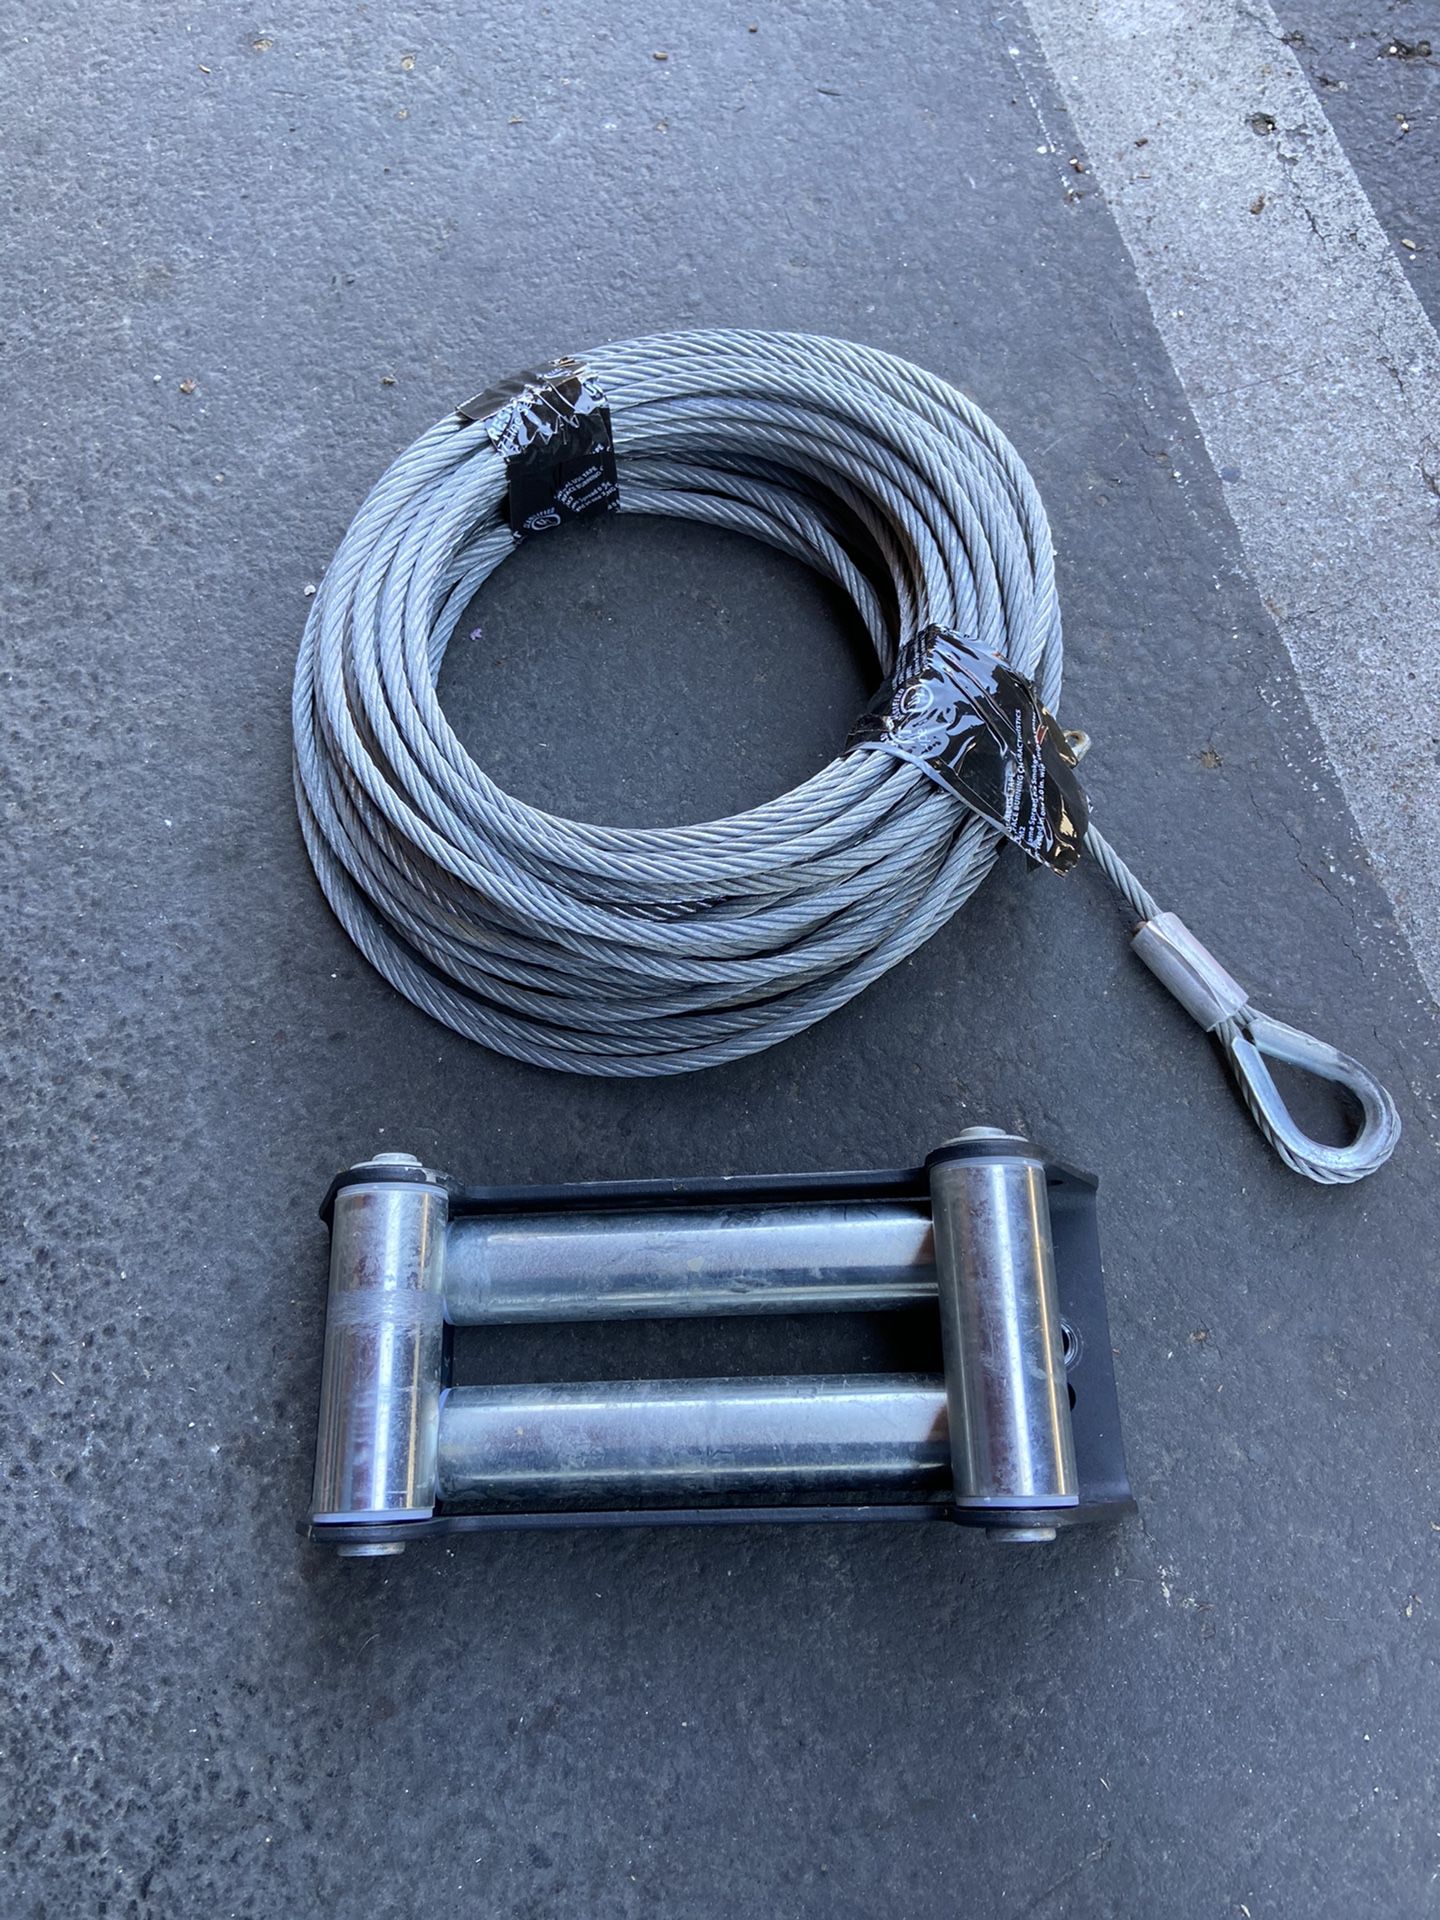 Winch cable and roller fairlead